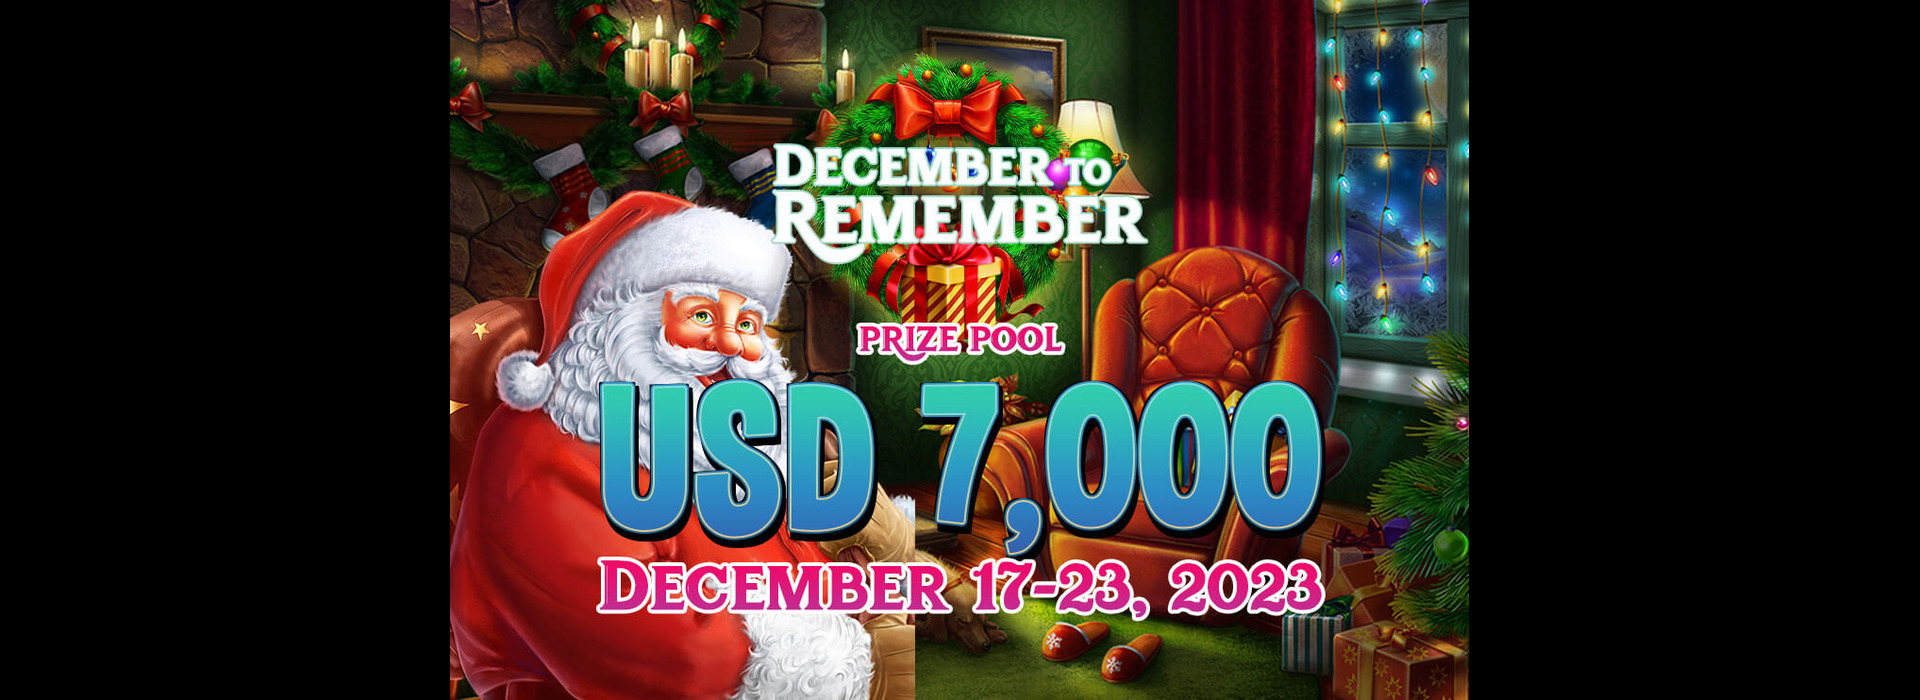 December to Remember!!All we want for Christmas is wins!